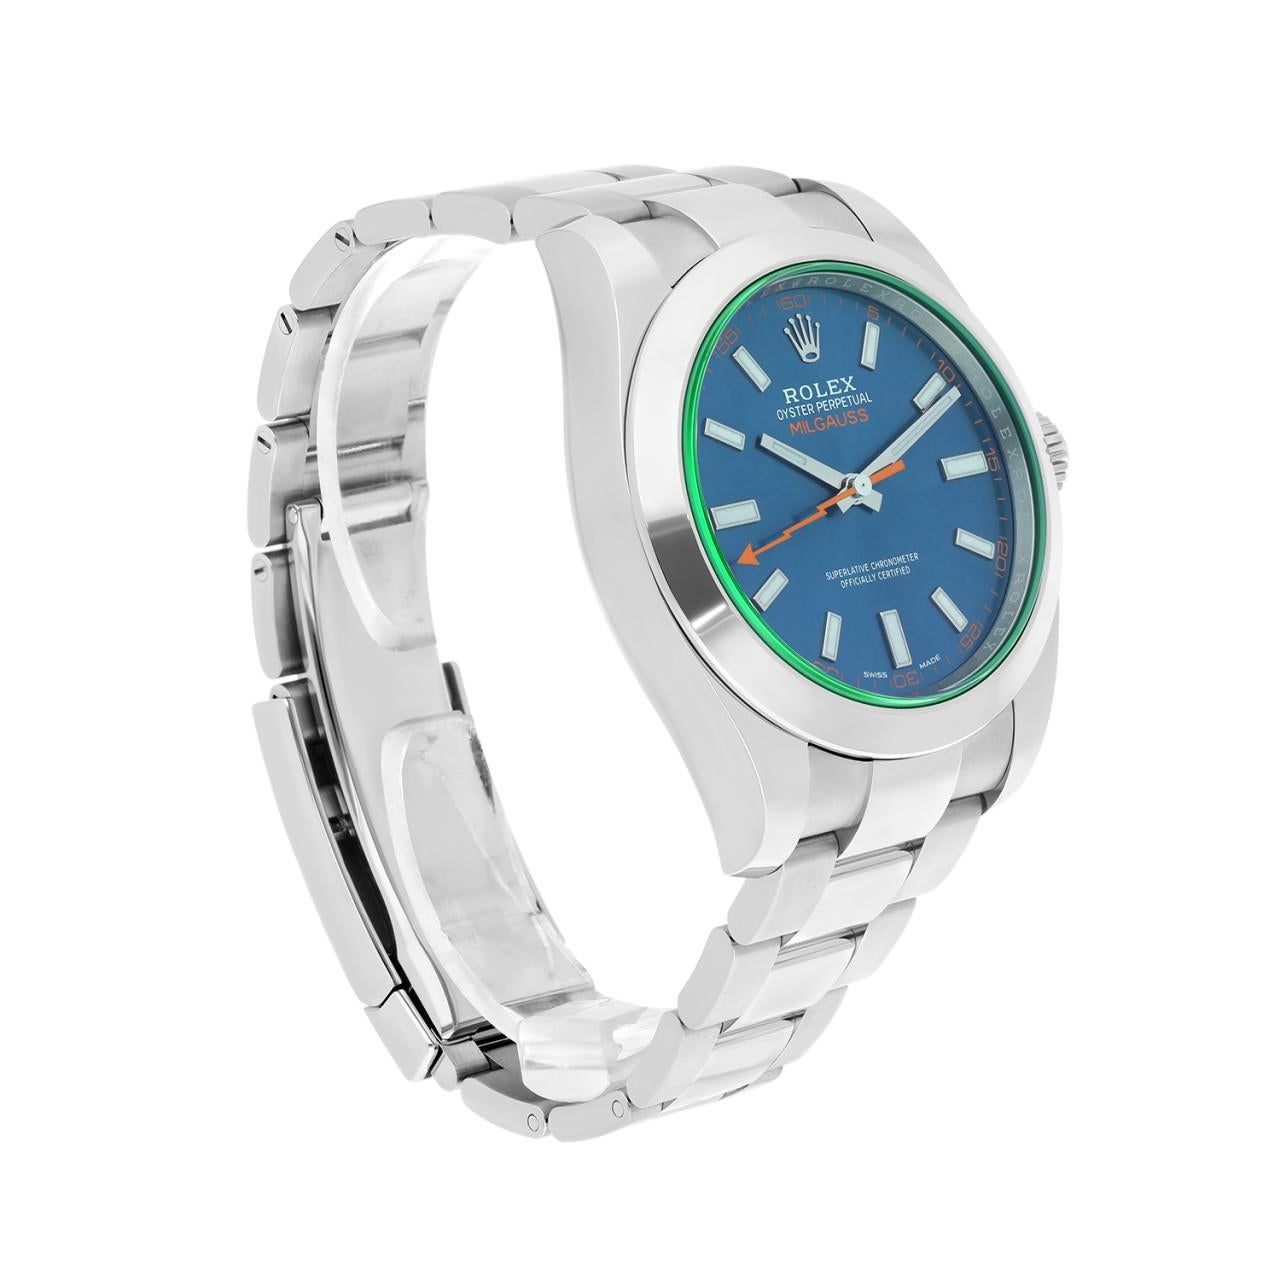 Rolex Milgauss 40mm Oyster 116400GV Stainless Steel Watch Blue Dial For Sale 2